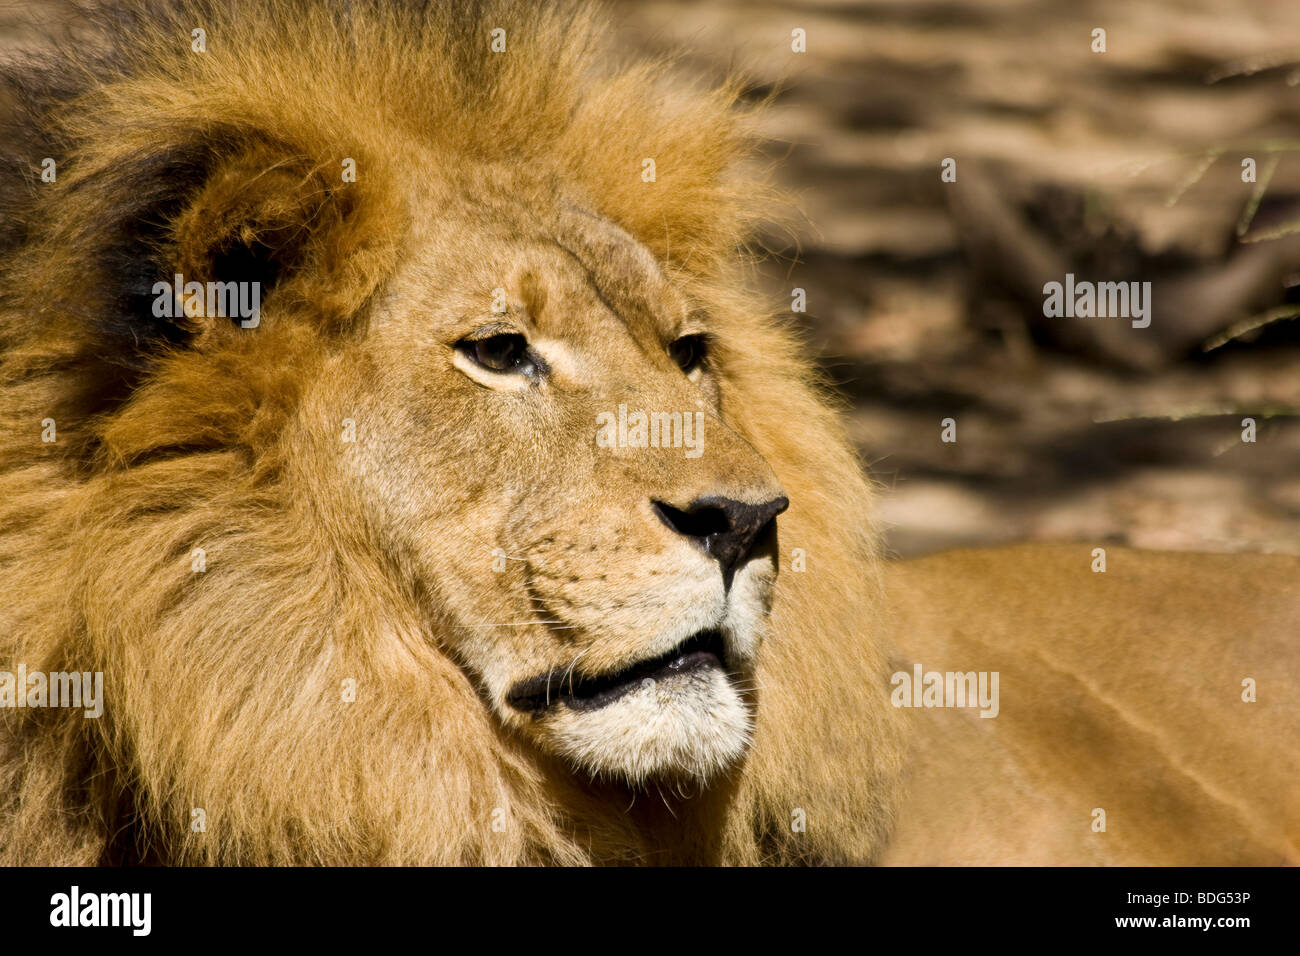 'African lion' at the 'Los Angeles Zoo' in 'Los Angeles, California'. Stock Photo